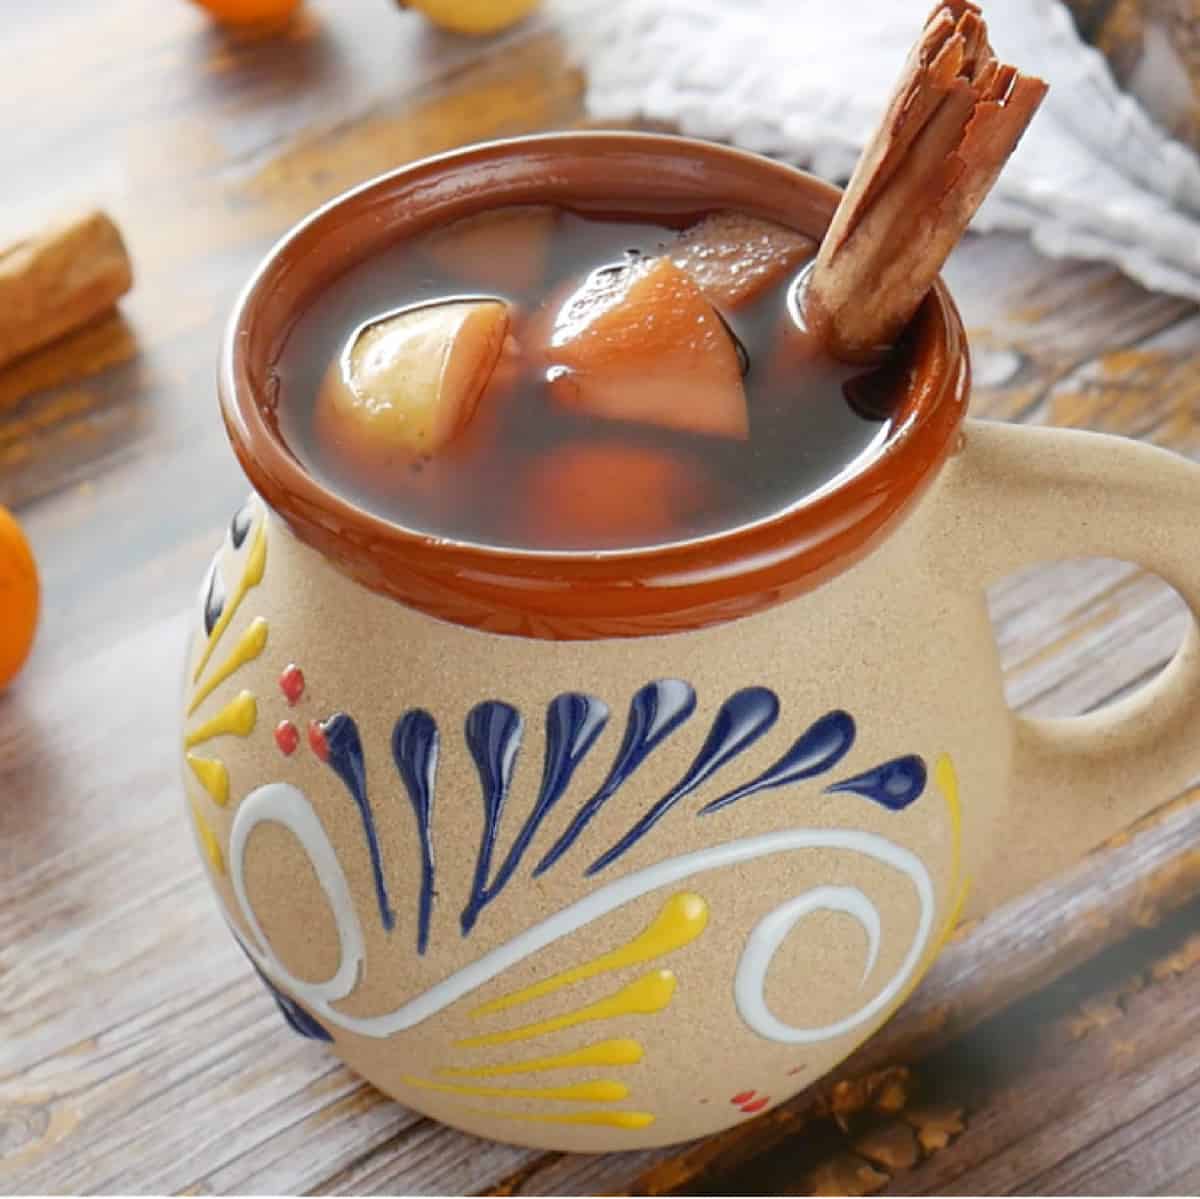 Ponche Navideño (Mexican Christmas Punch) served in a decorative clay mug with a cinnamon stick.